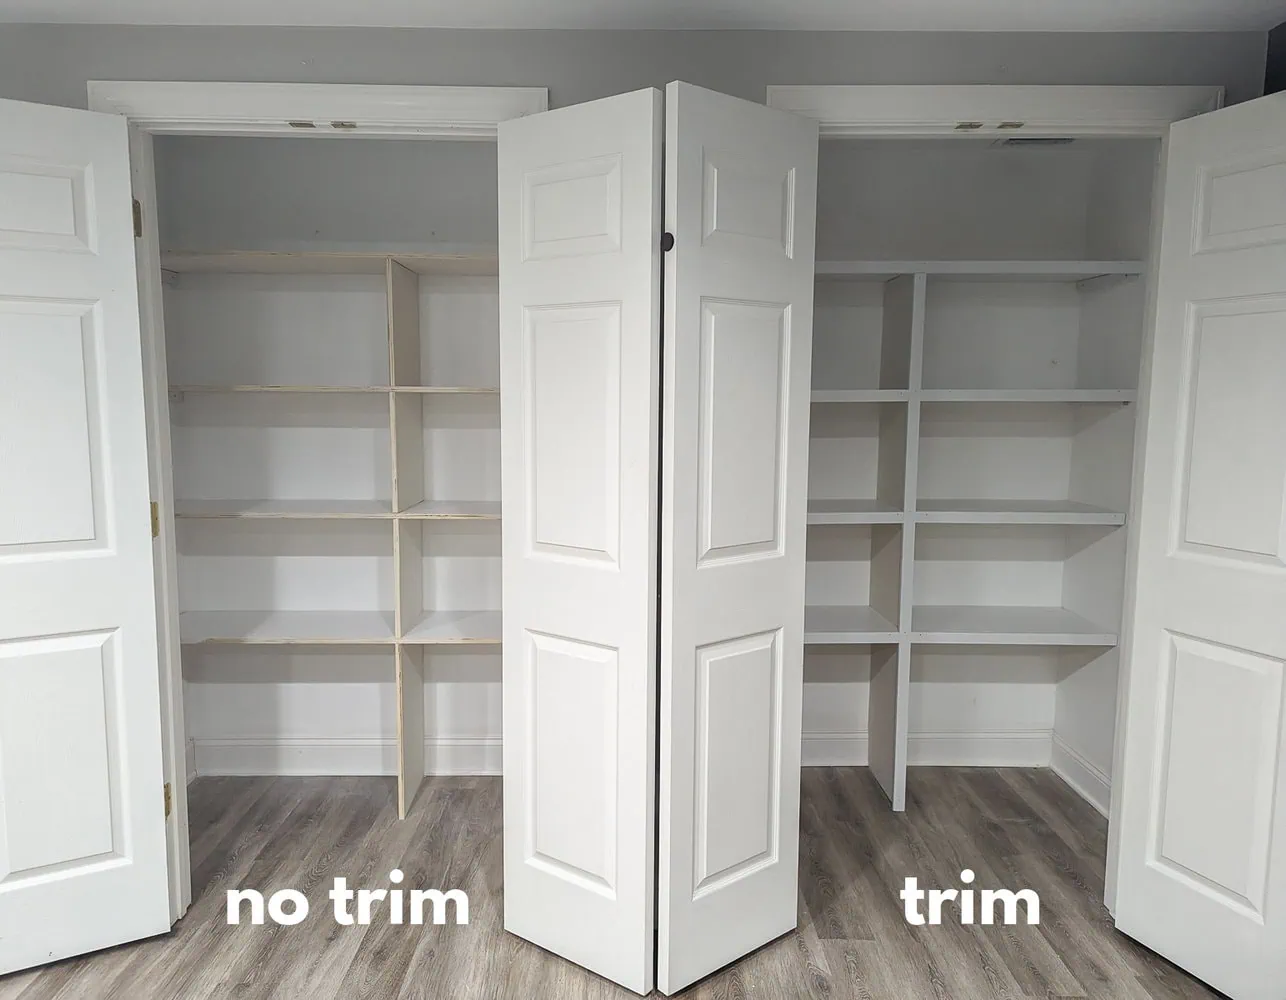 one closet with shelves without trim and one closet with finished shelves.